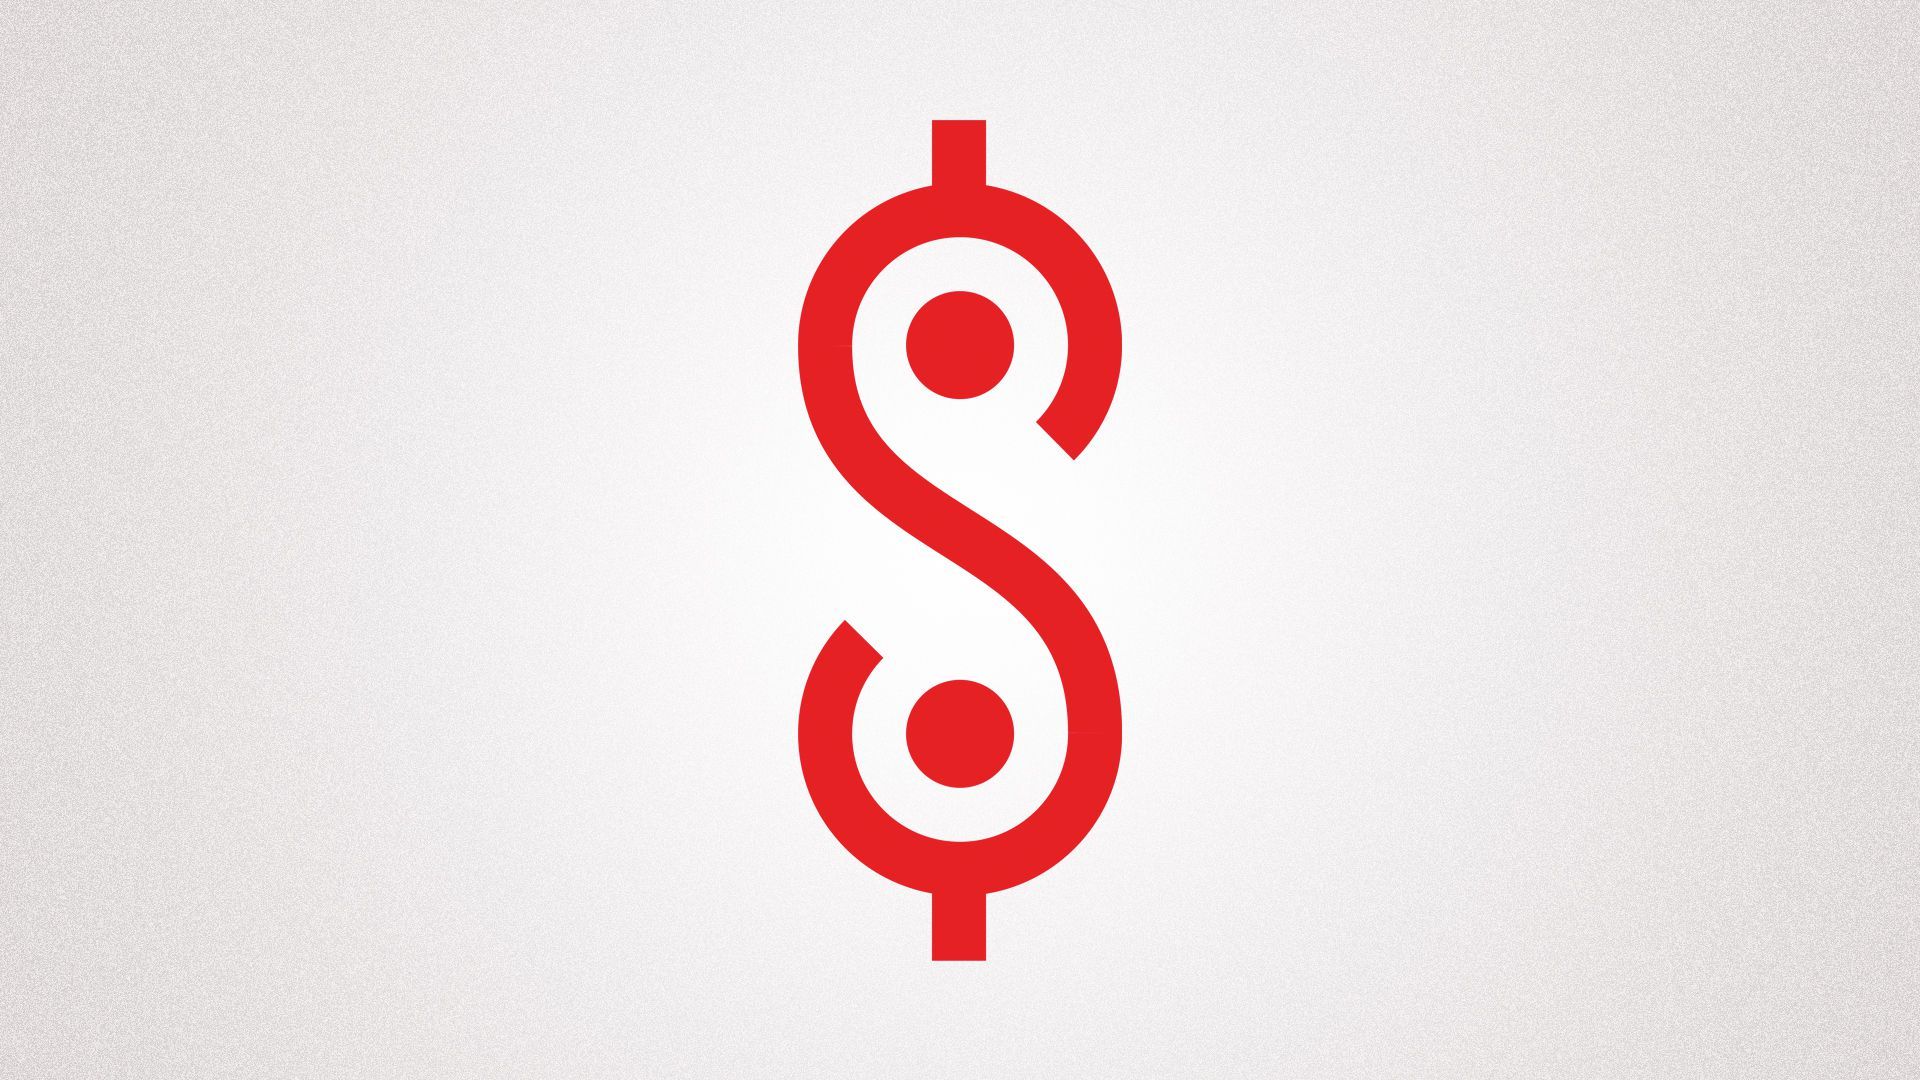 Illustration of the Target Corp. logo edited into a dollar sign.